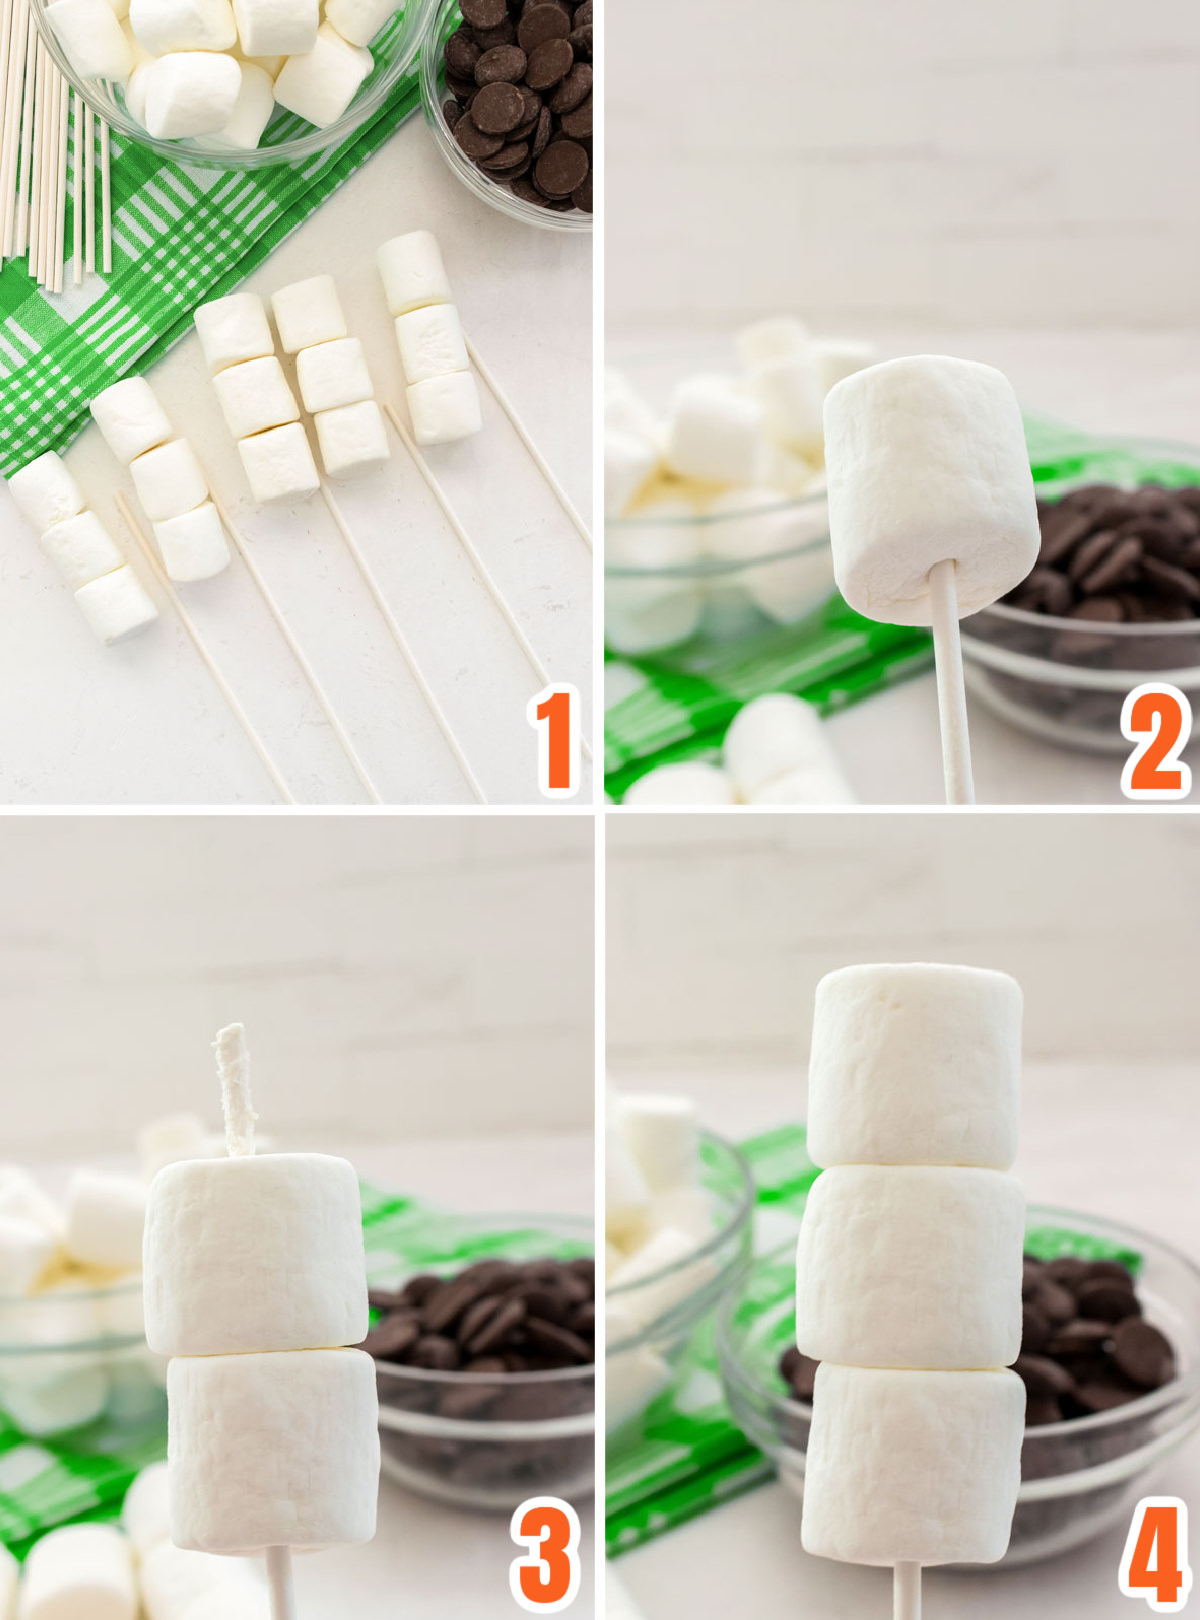 Collage image showing how to assemble the Marshmallow Pop.